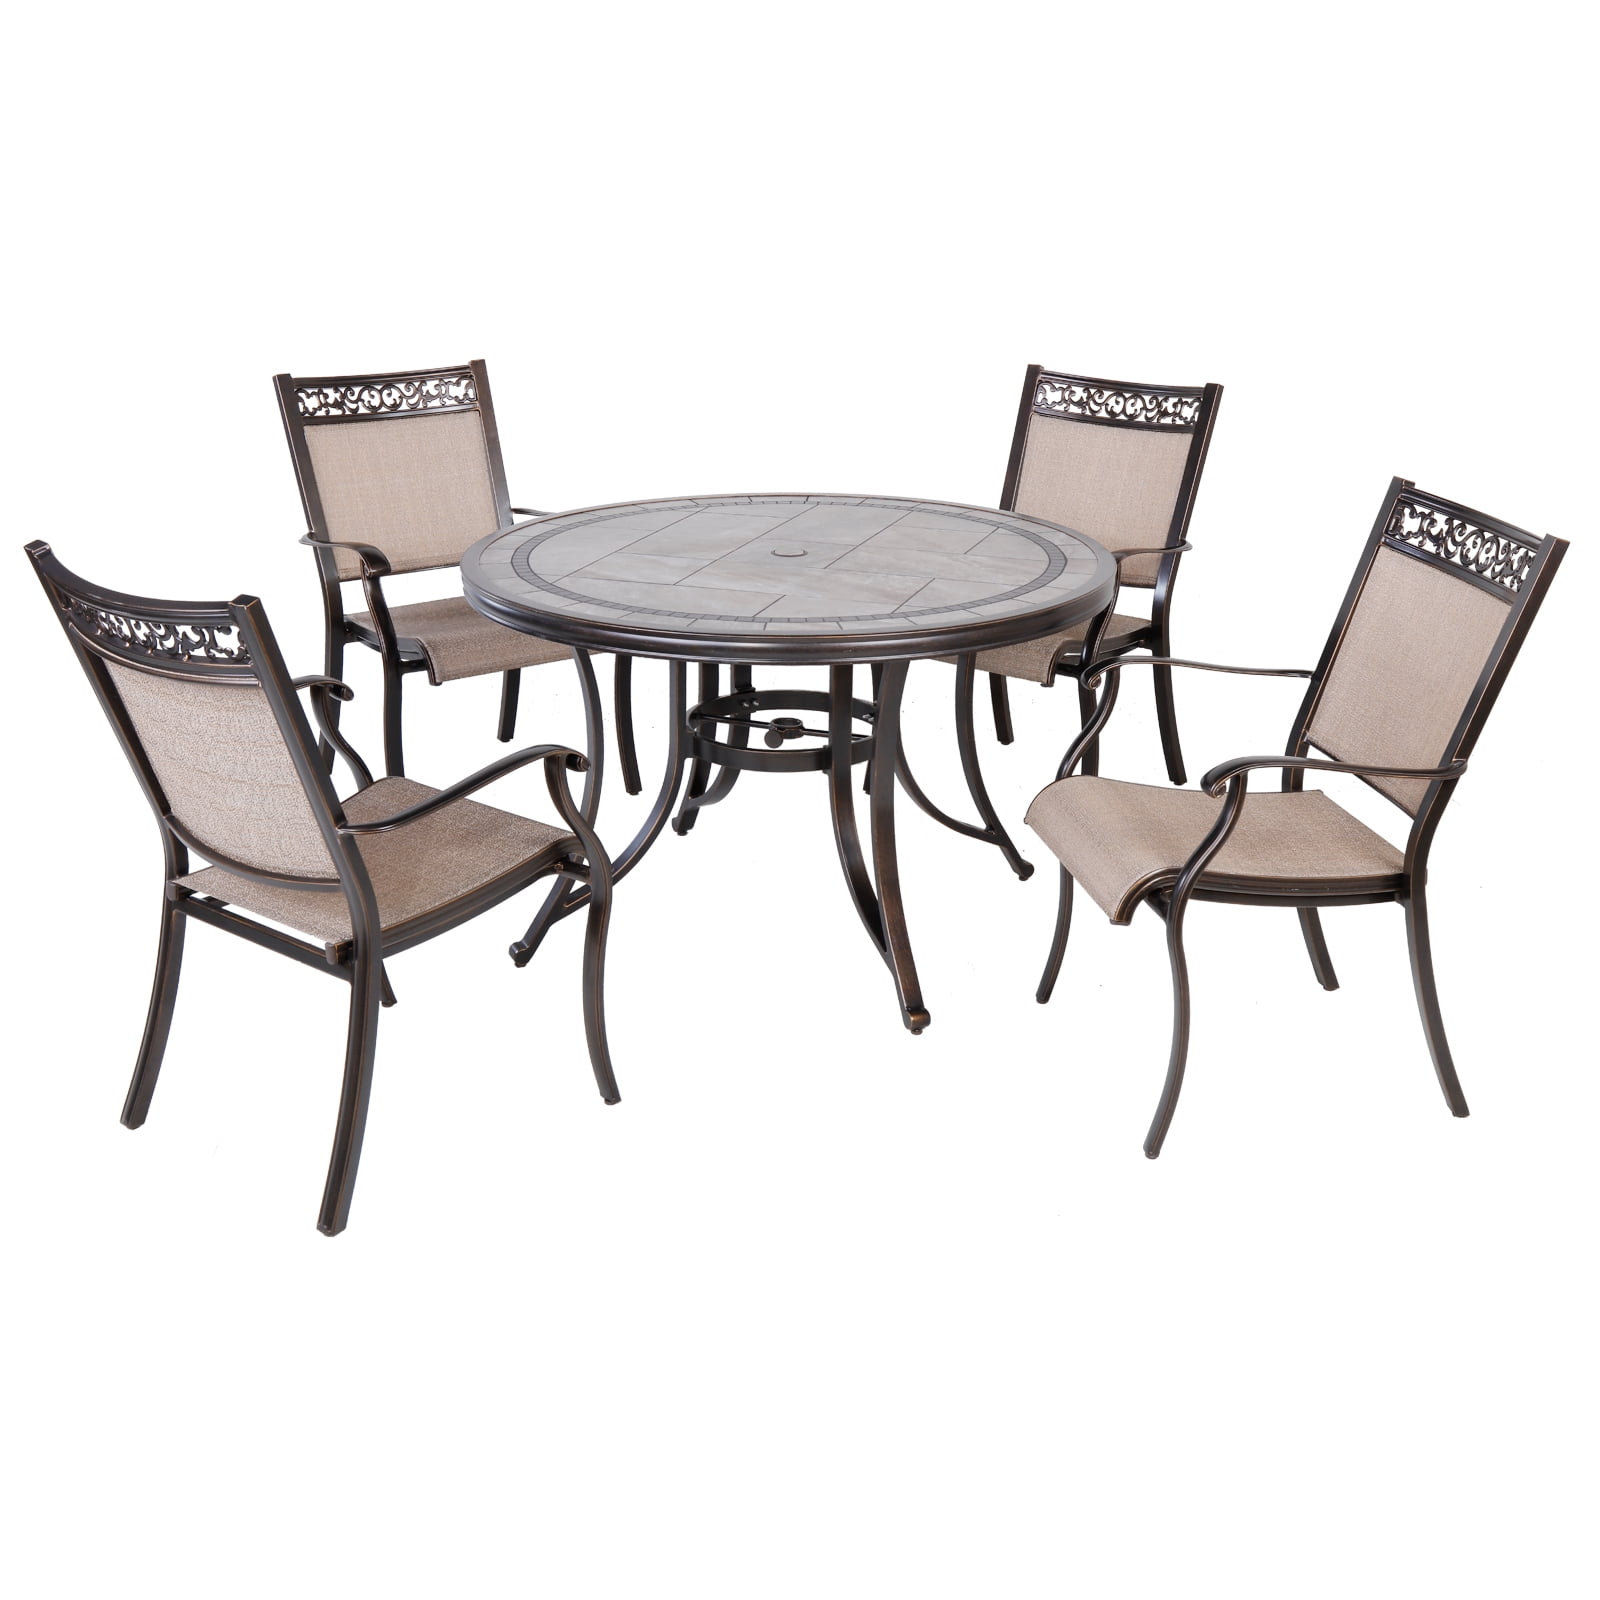 5PC MOSAIC BISTRO SETS ROUND TABLE FOLDING CHAIRS OUTDOOR GARDEN DINING CAFE 